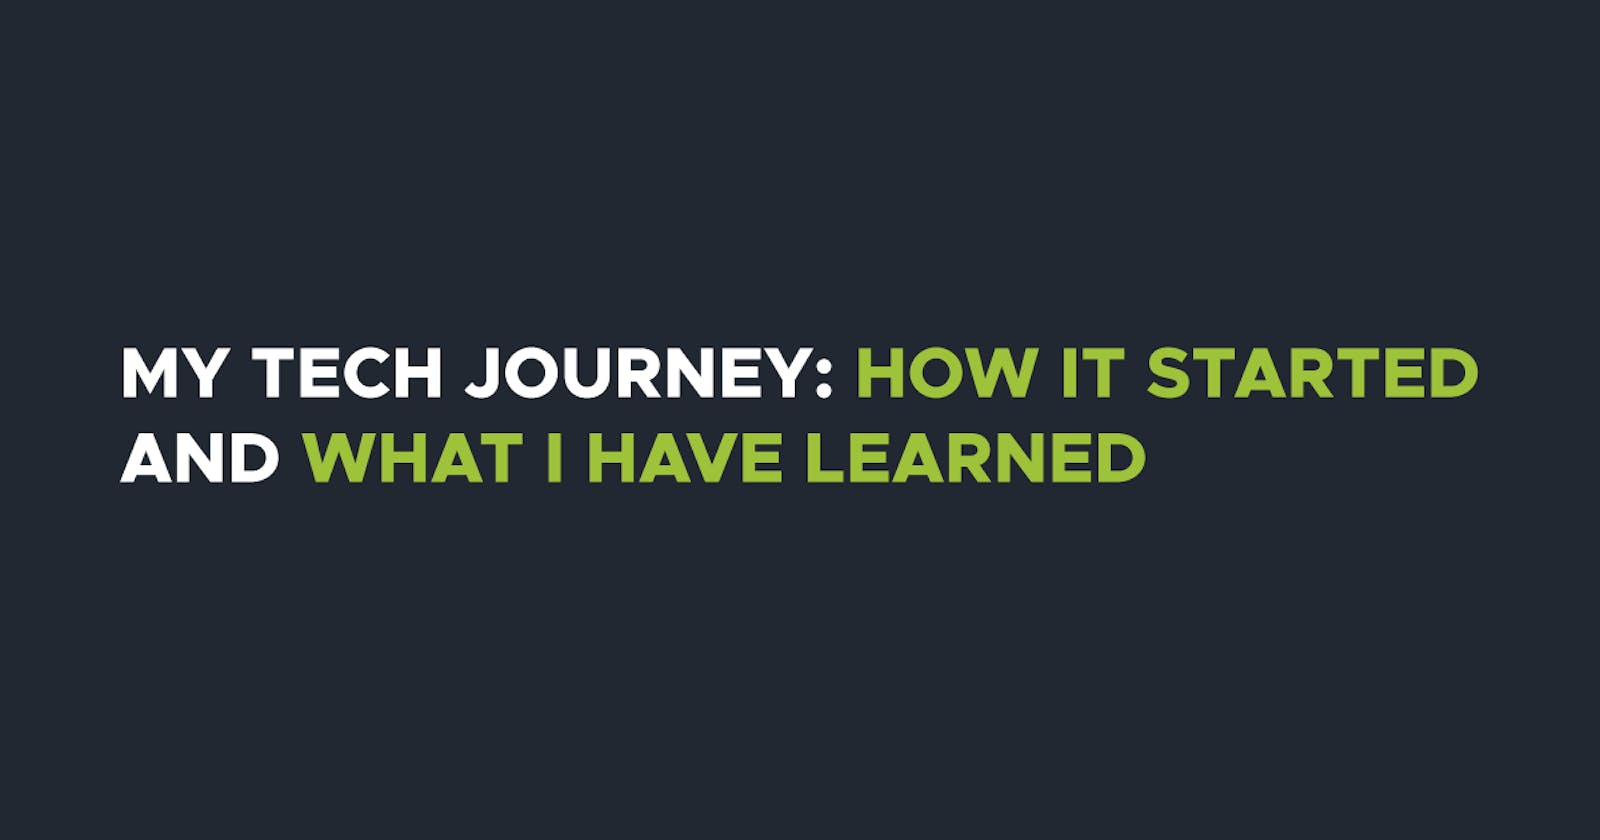 My Tech Journey: How It Started And What I Have Learned